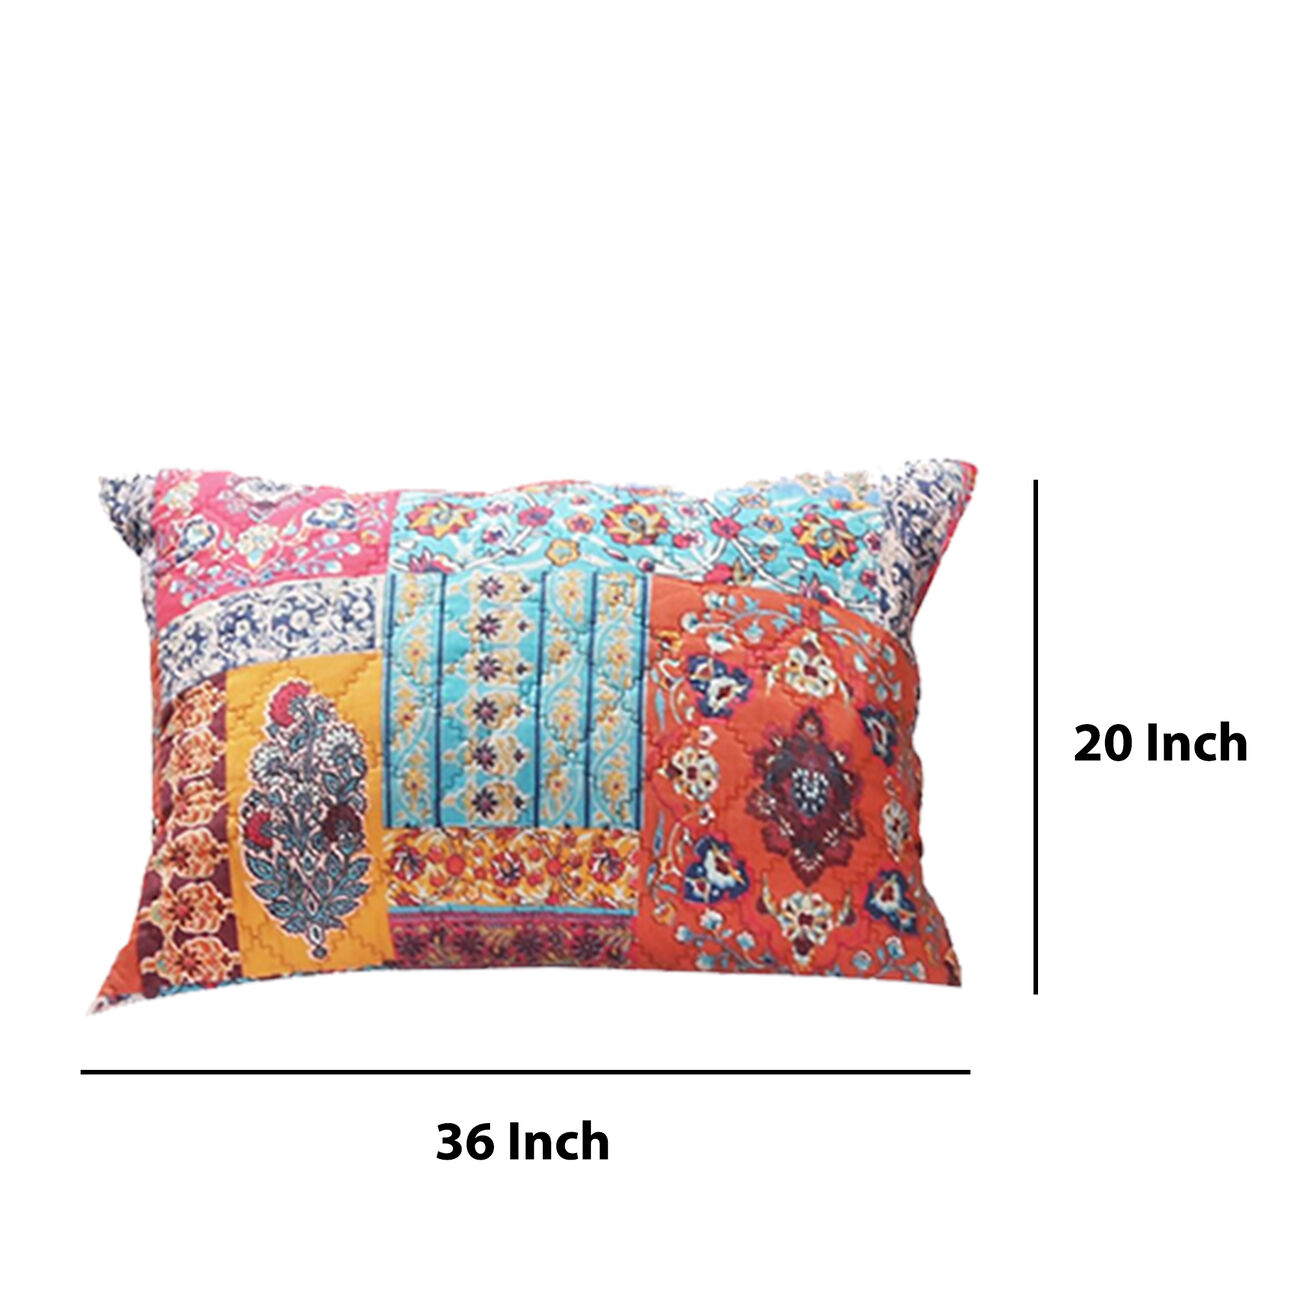 Bohemian Style Fabric King Size Pillow Sham with Floral Pattern, Multicolor